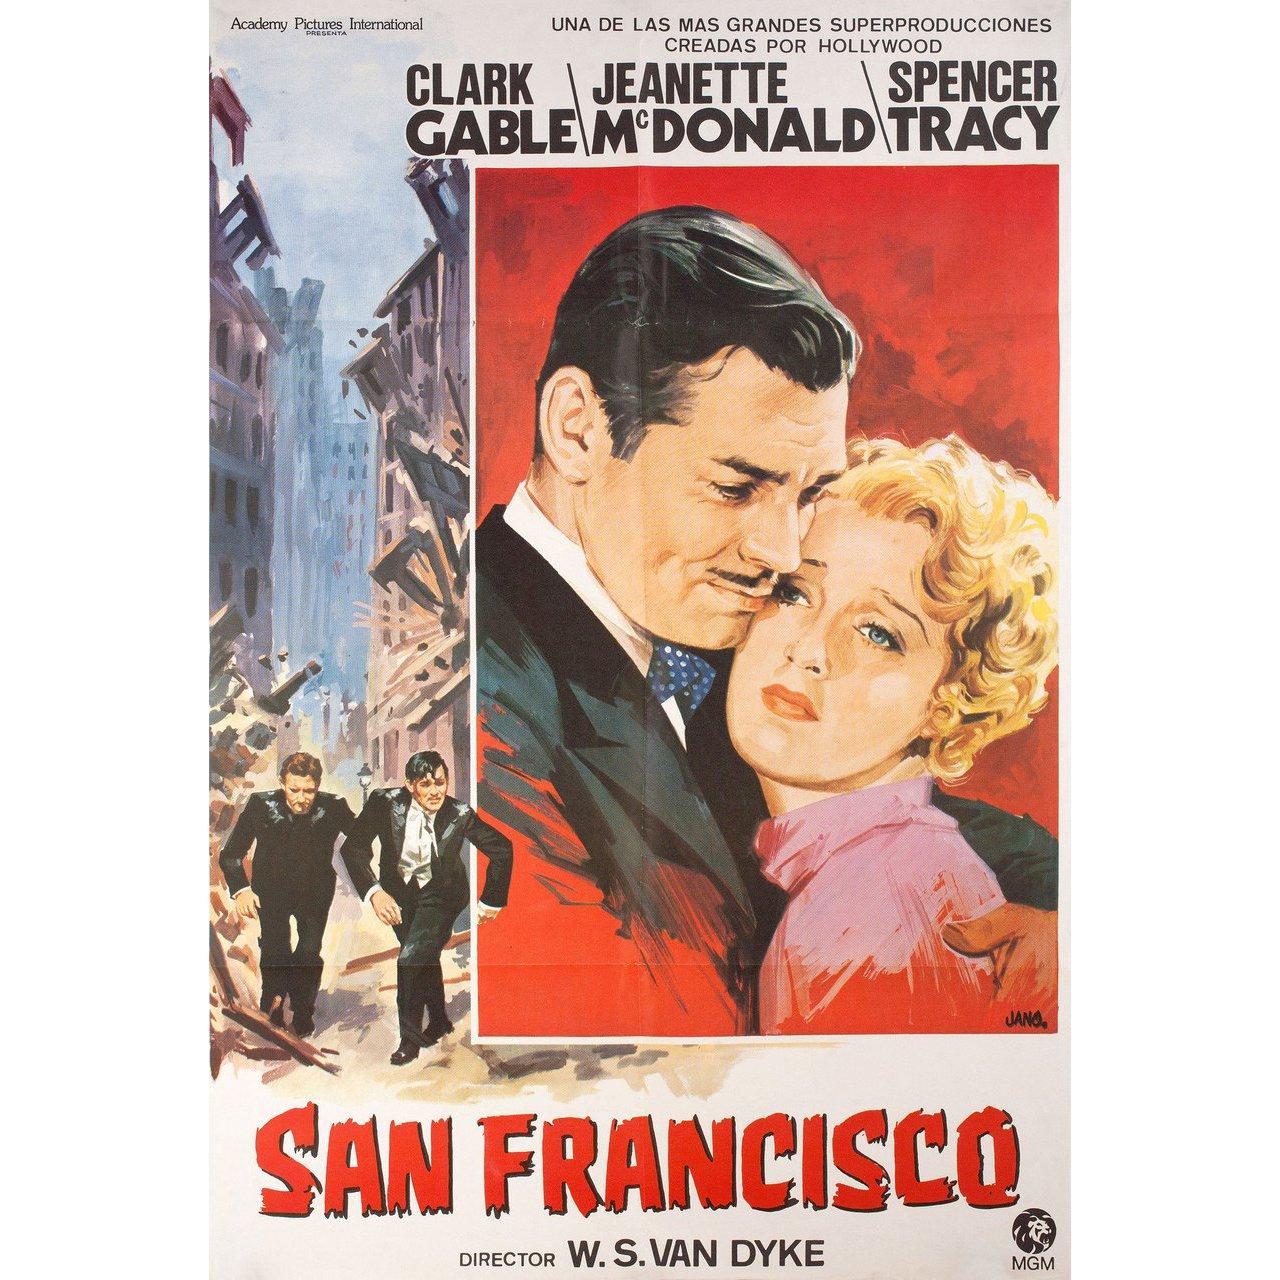 Original 1970s re-release Spanish B1 poster by Jano for the 1936 film San Francisco directed by W.S. Van Dyke with Clark Gable / Jeanette MacDonald / Spencer Tracy / Jack Holt. Very good-fine condition, folded. Many original posters were issued